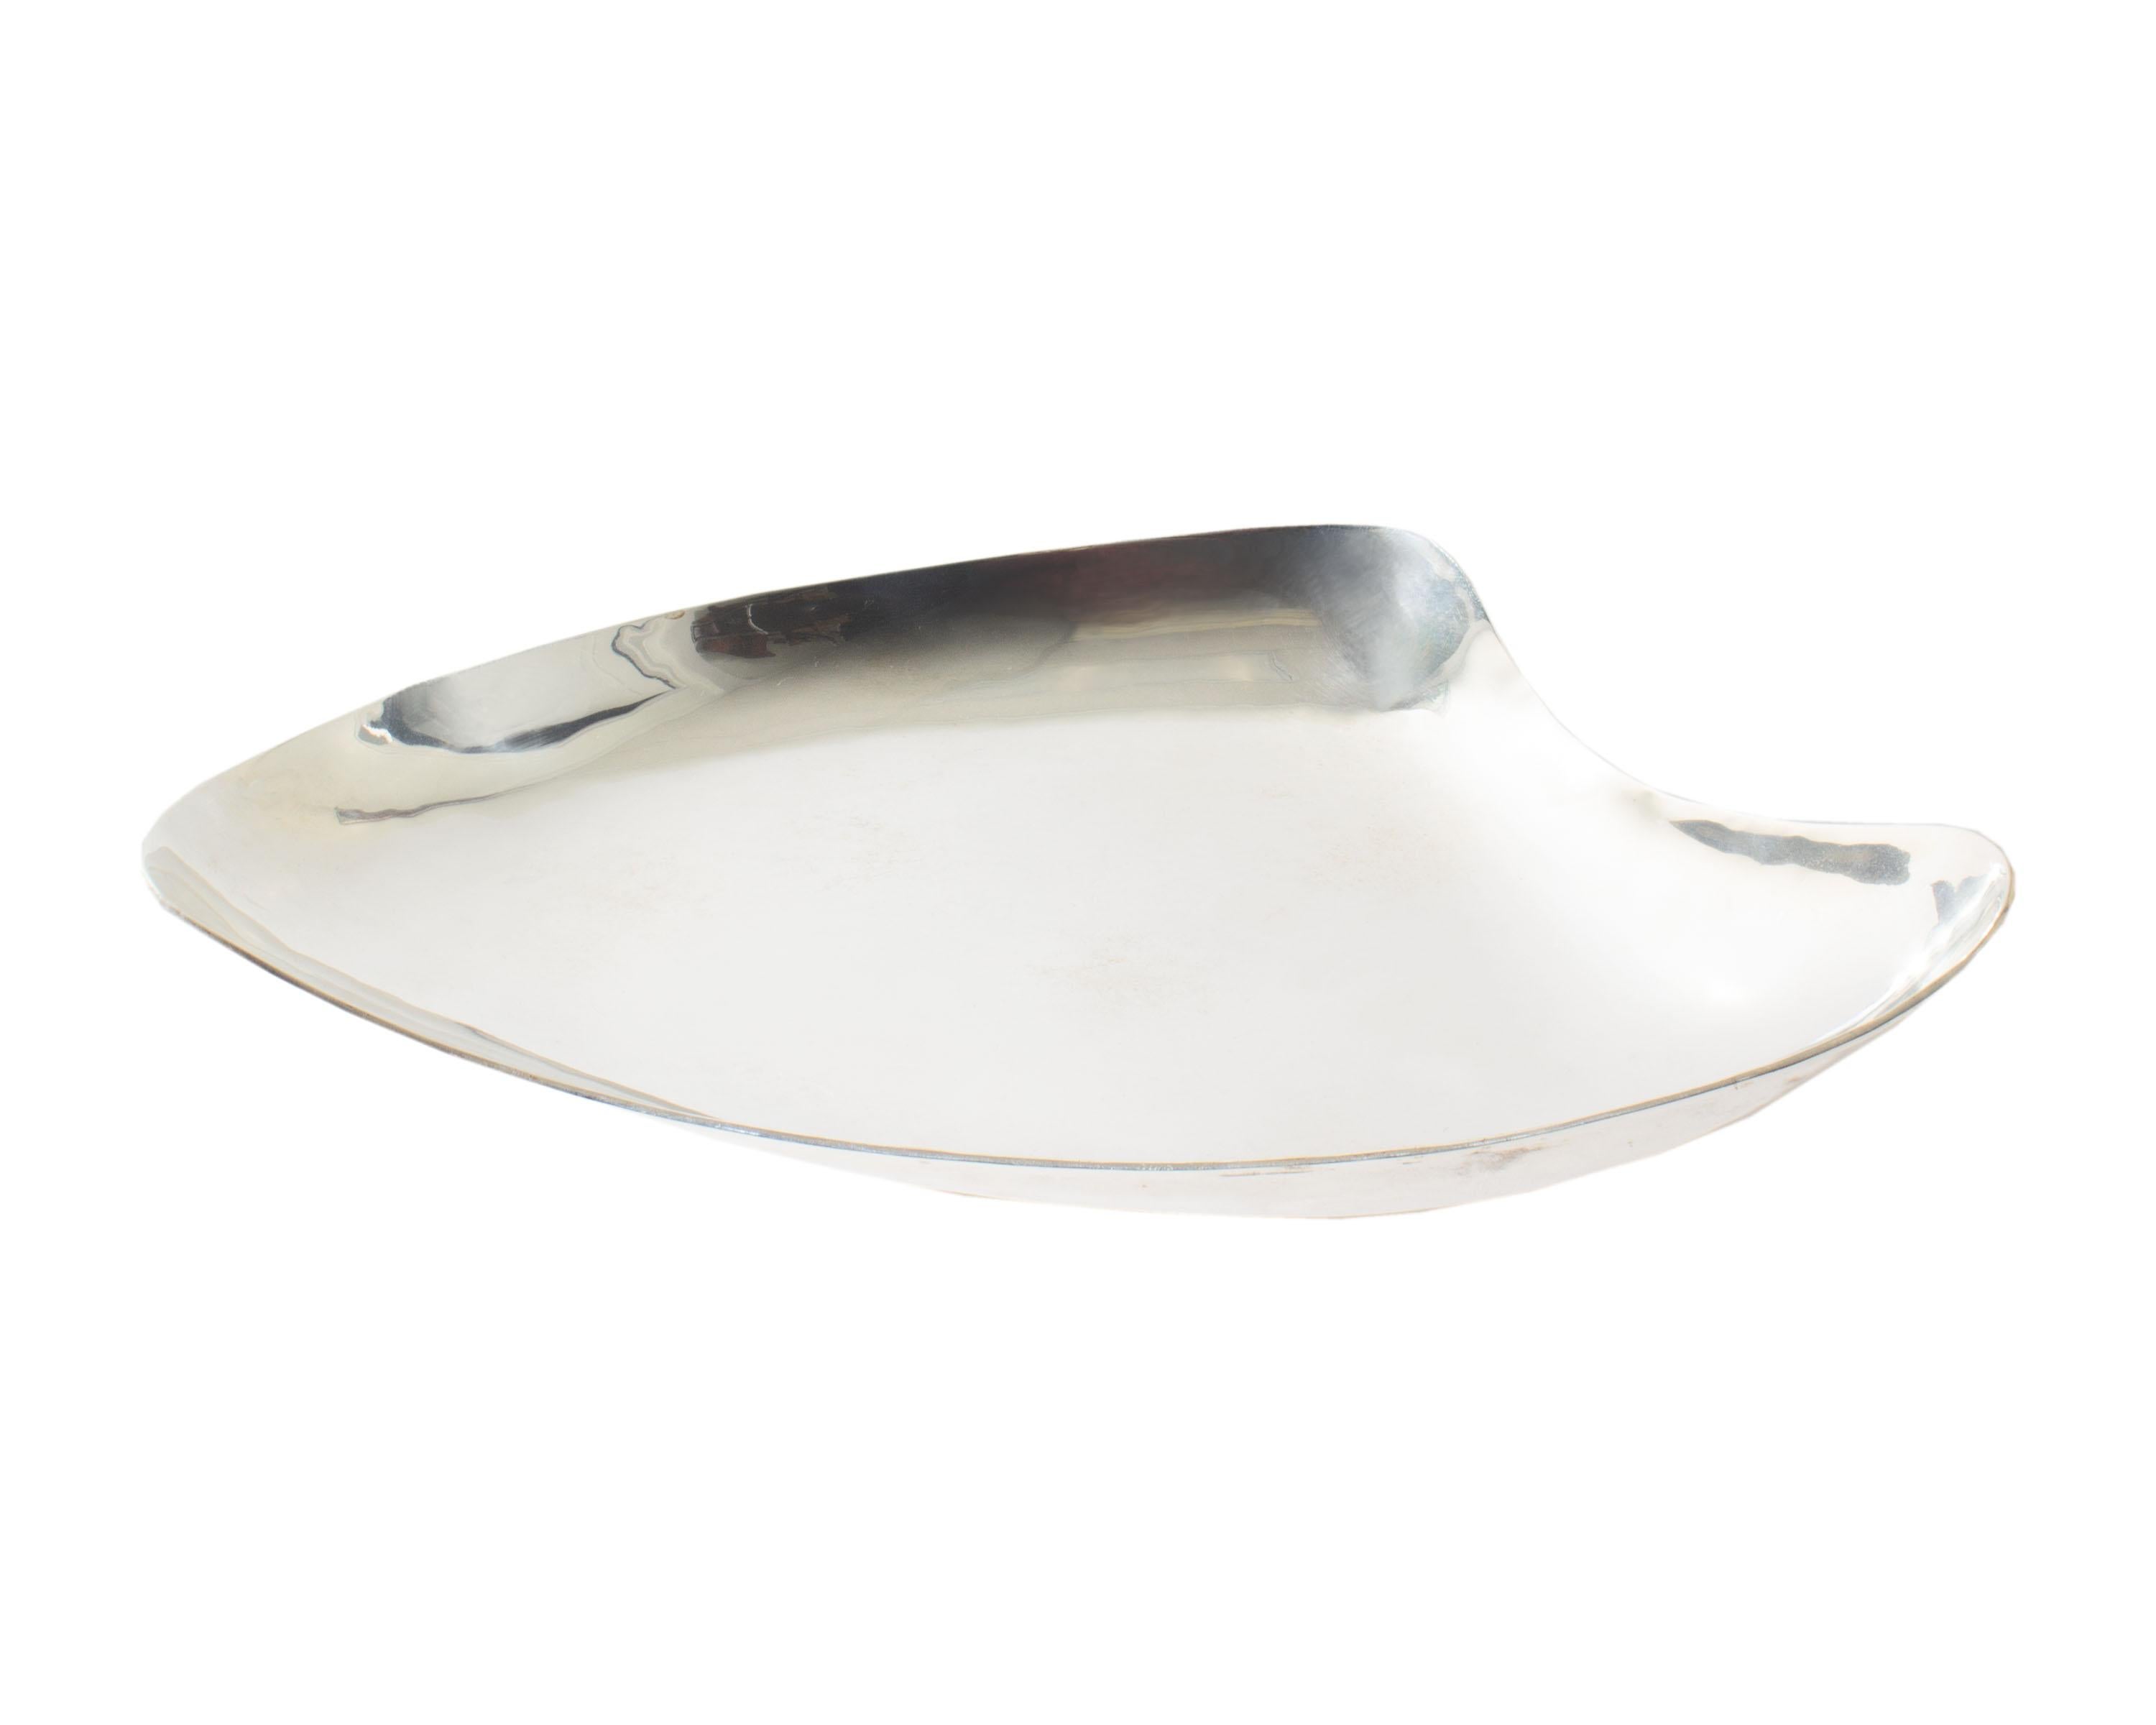 A Modernist sterling silver biomorphic bowl designed by C. Zurita. Made in Mexico, this handwrought bowl features a sleek design and is raised upon three petite feet.  Marked verso 